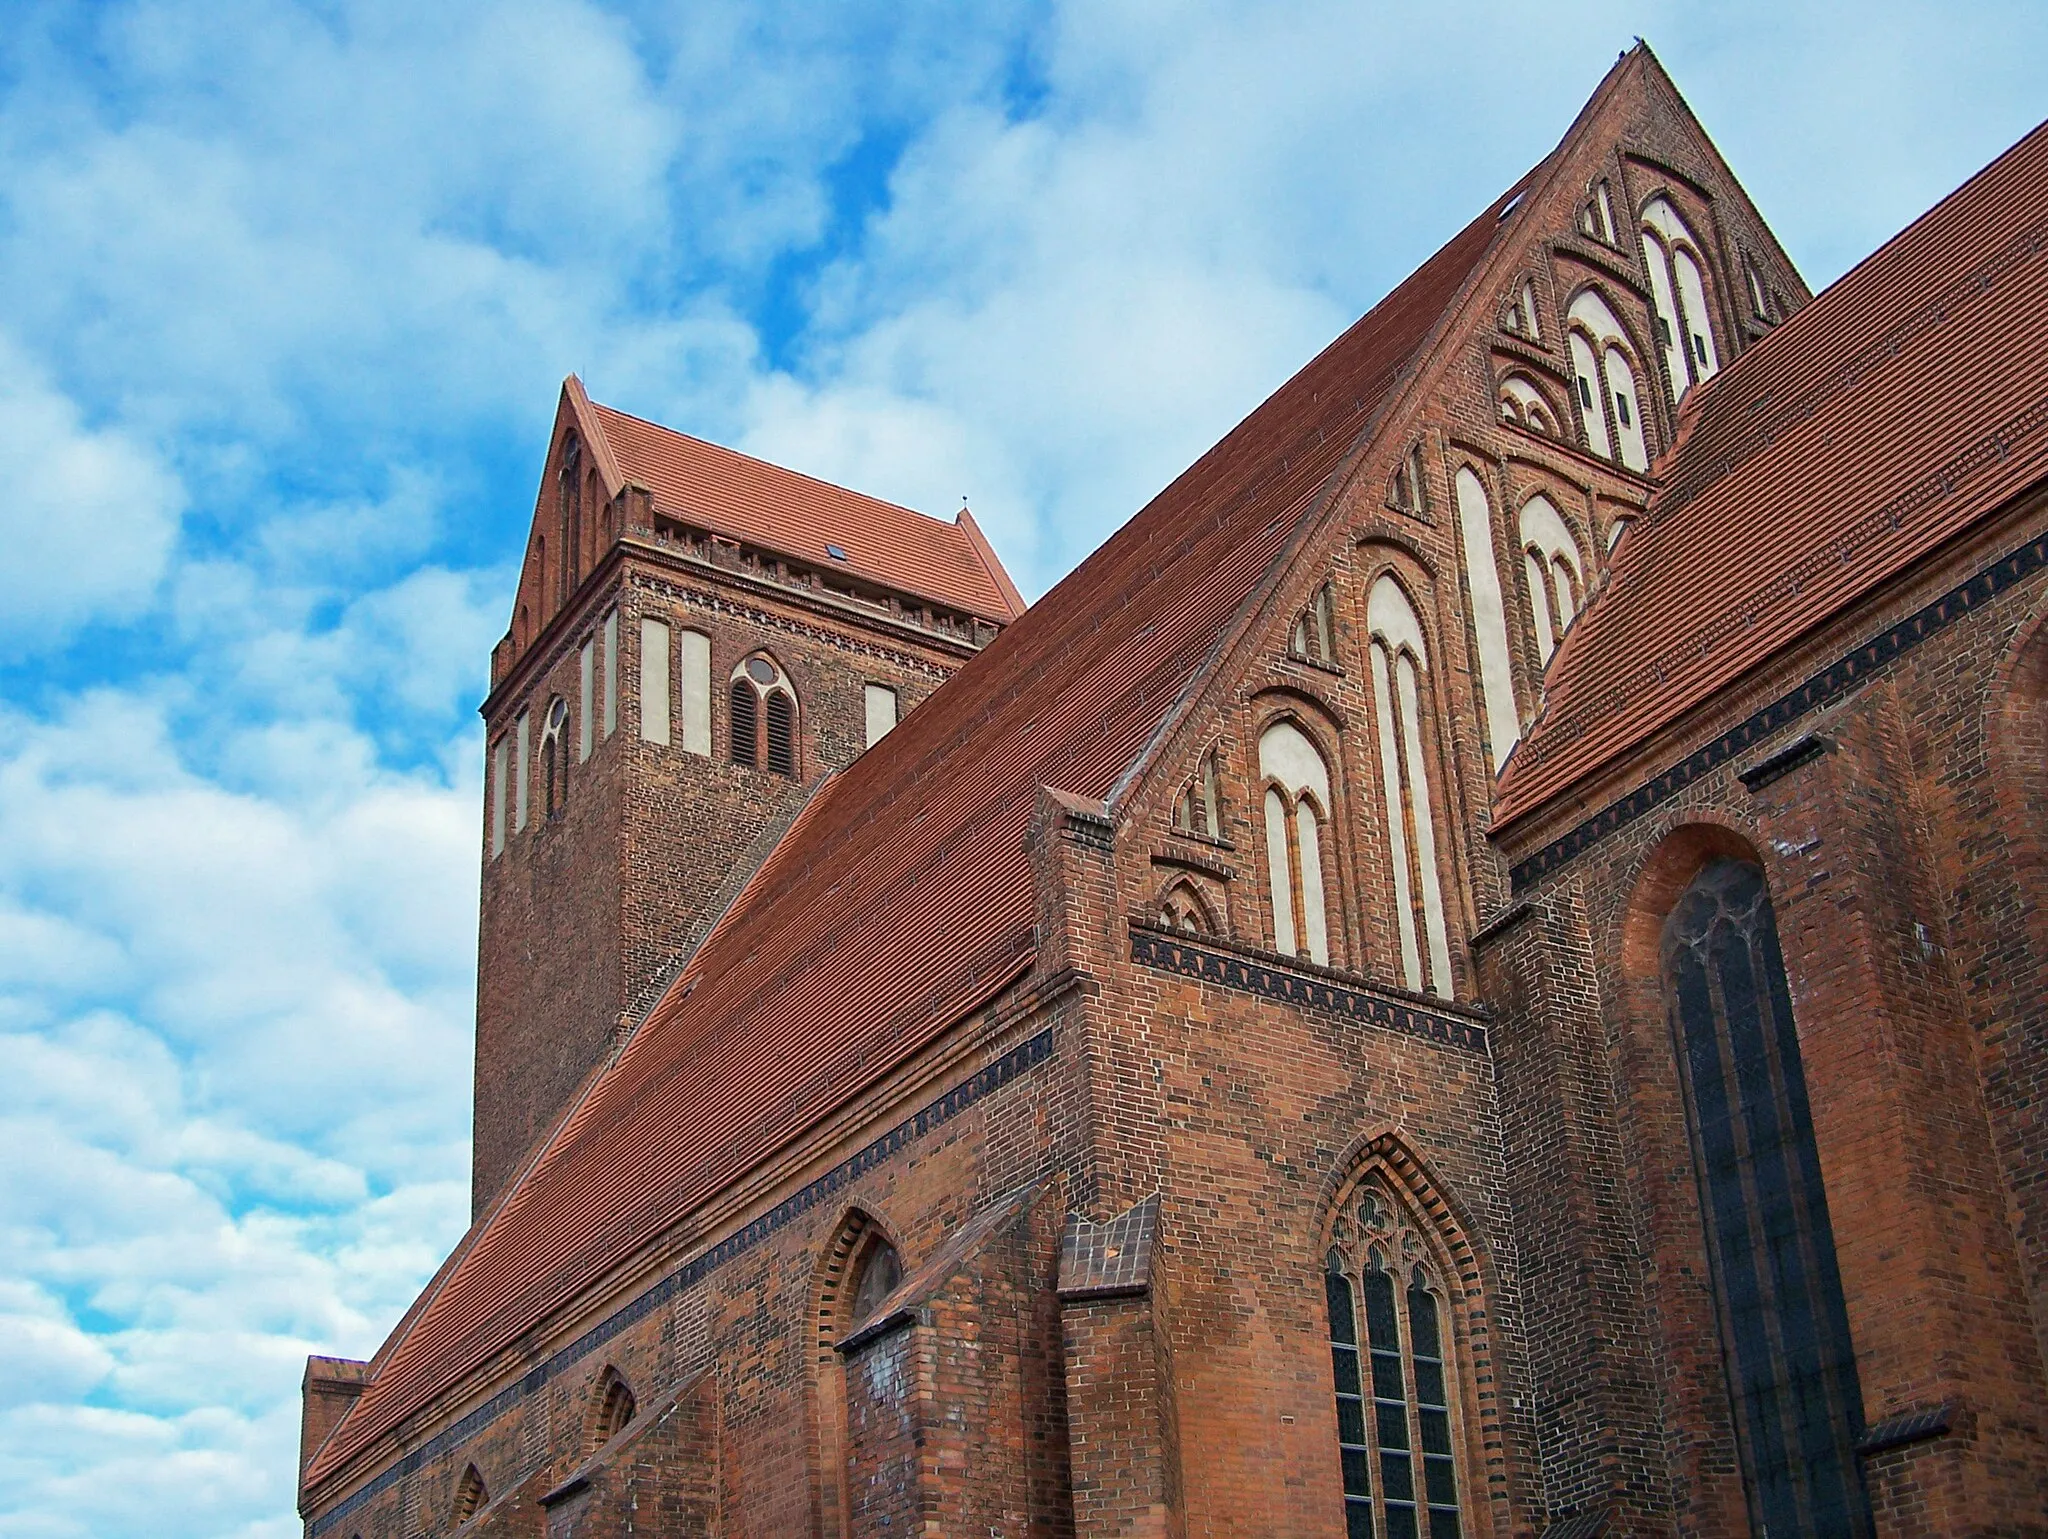 Photo showing: Perleberg: St. Jakobi church built in late Gothic hall style, dating back to 1294.